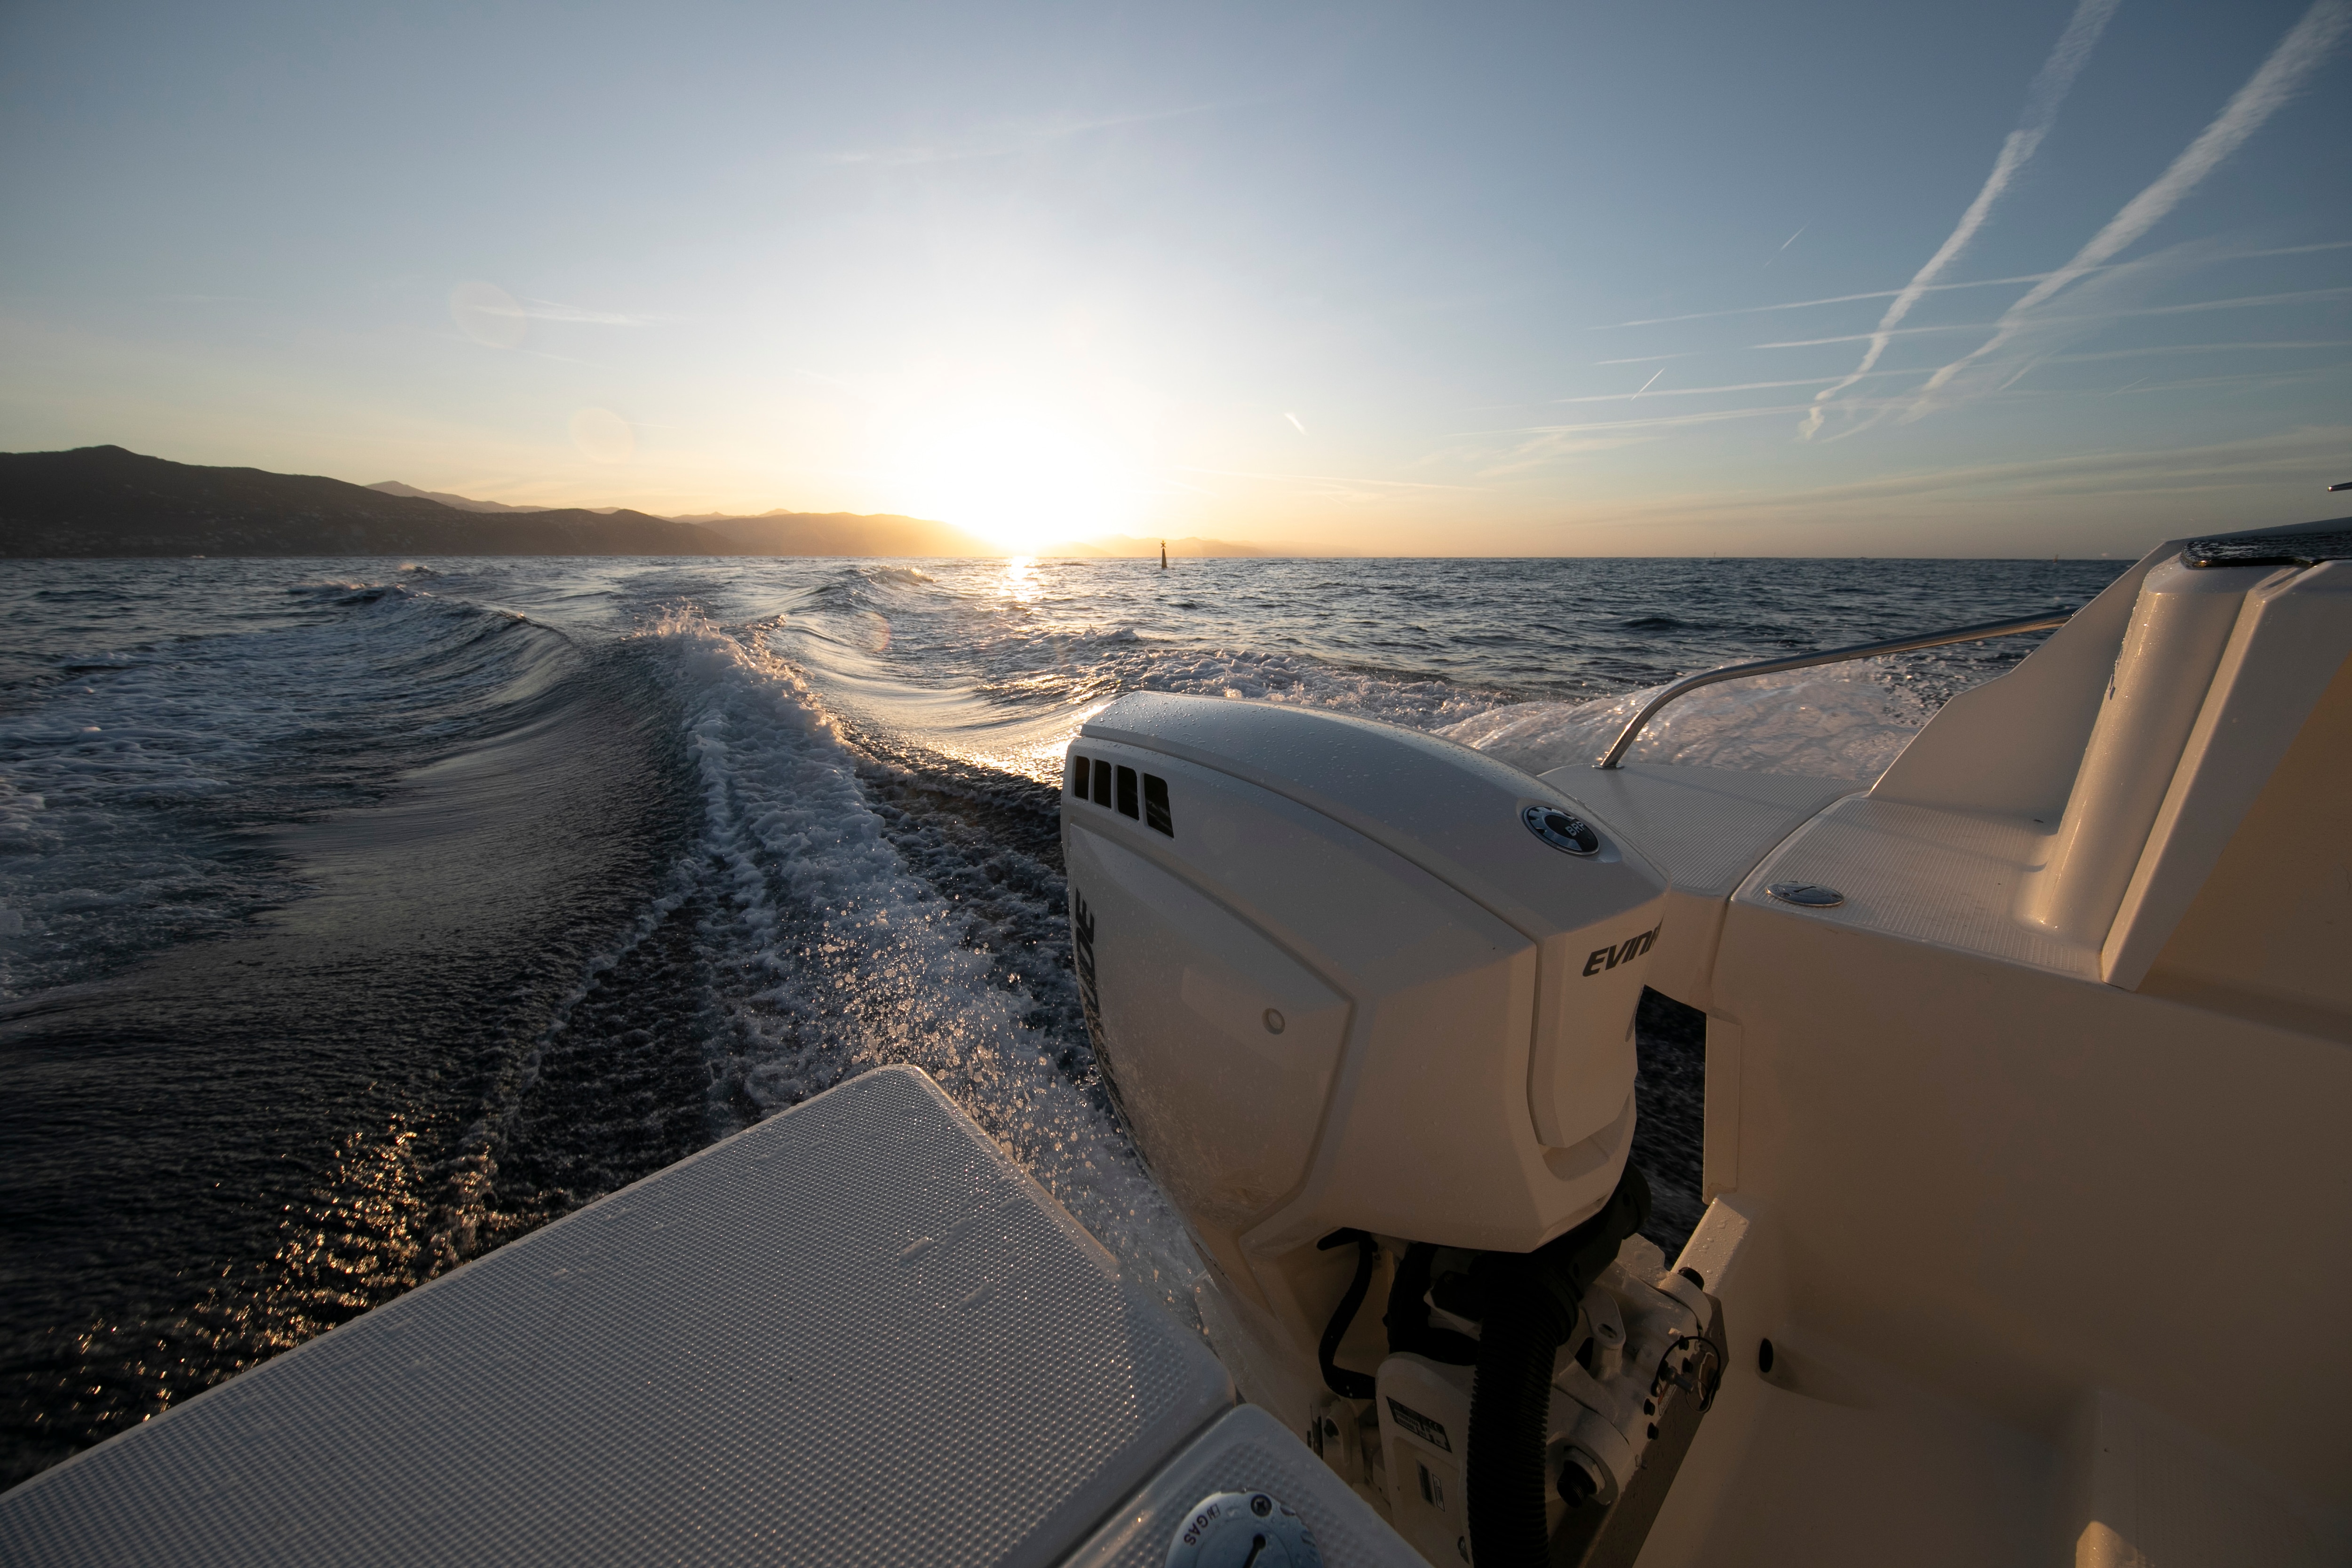 Evinrude motor with a sunset in the background